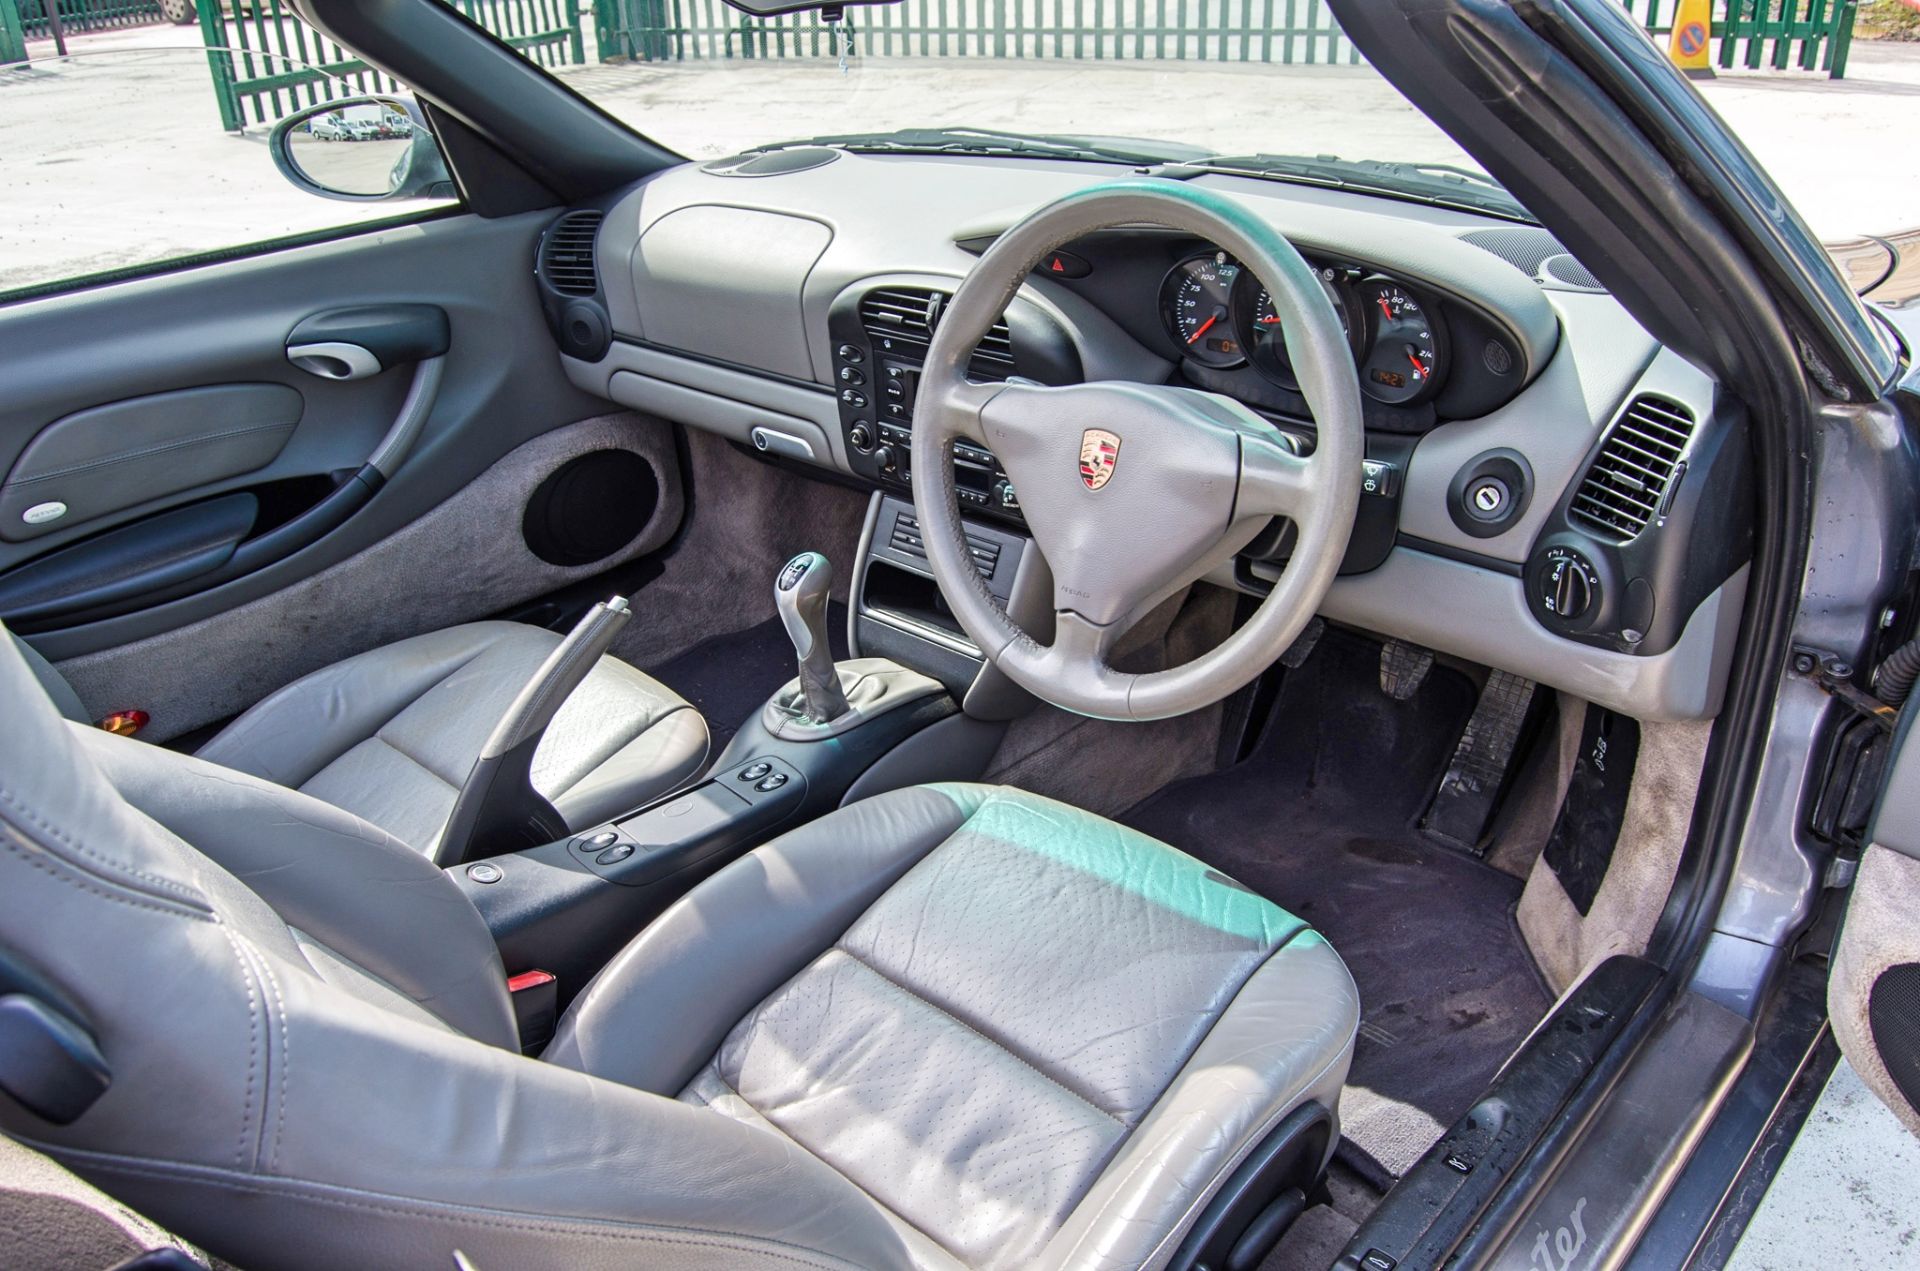 2003 Porsche Boxster 2.7 5 speed manual convertible roadster - Image 33 of 50